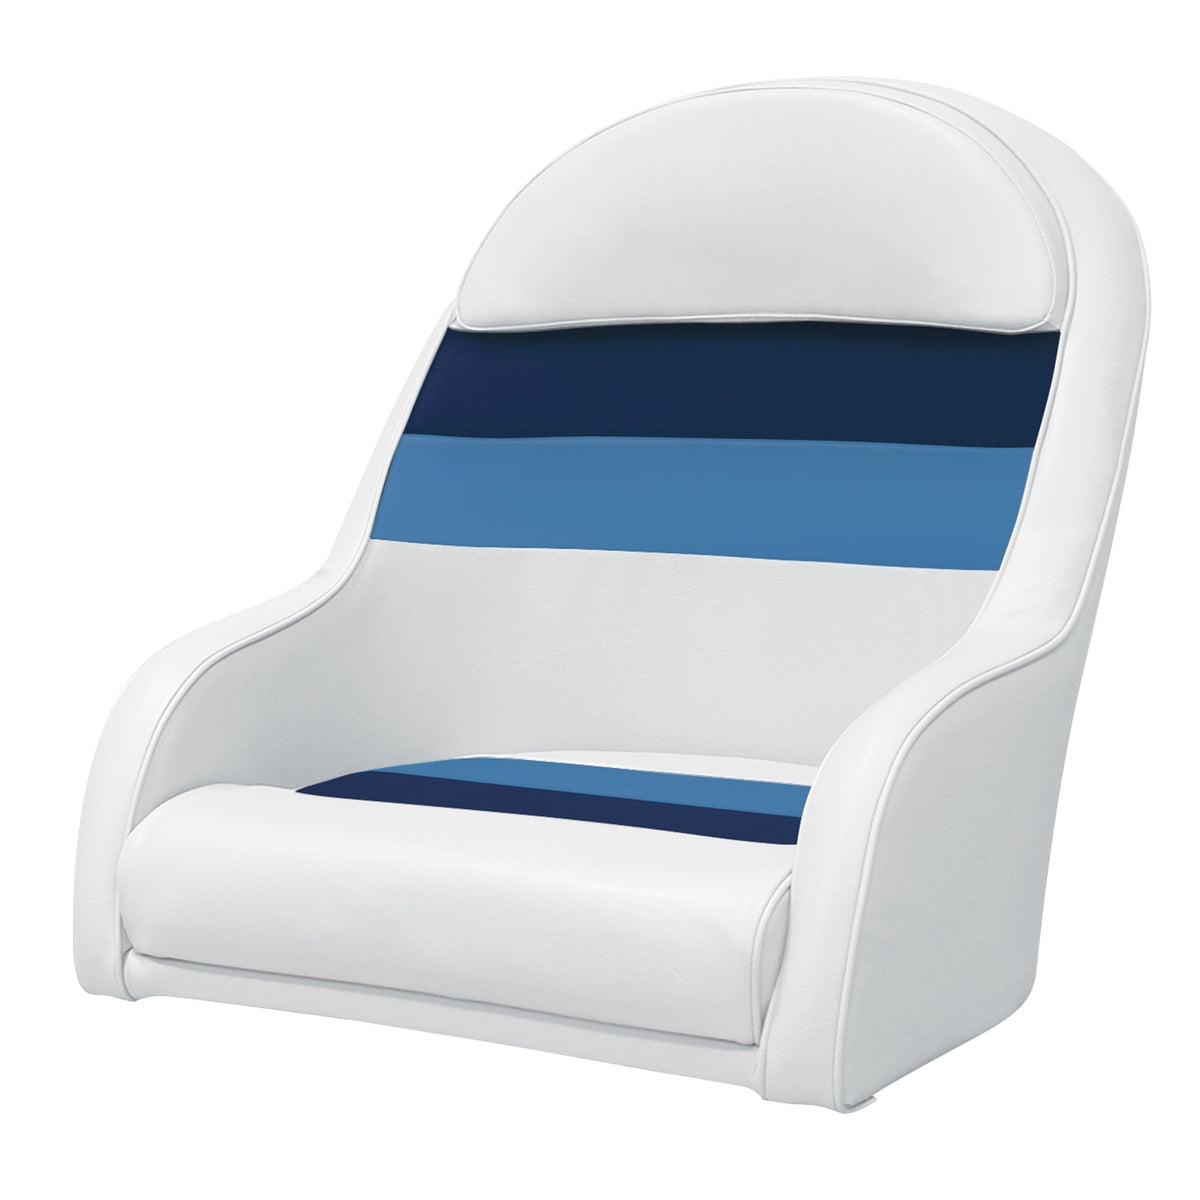 Wise Oversized - Not Qualified for Free Shipping Wise Captain's Bucket Seat White/Navy/Blue #8WD120LS-1008